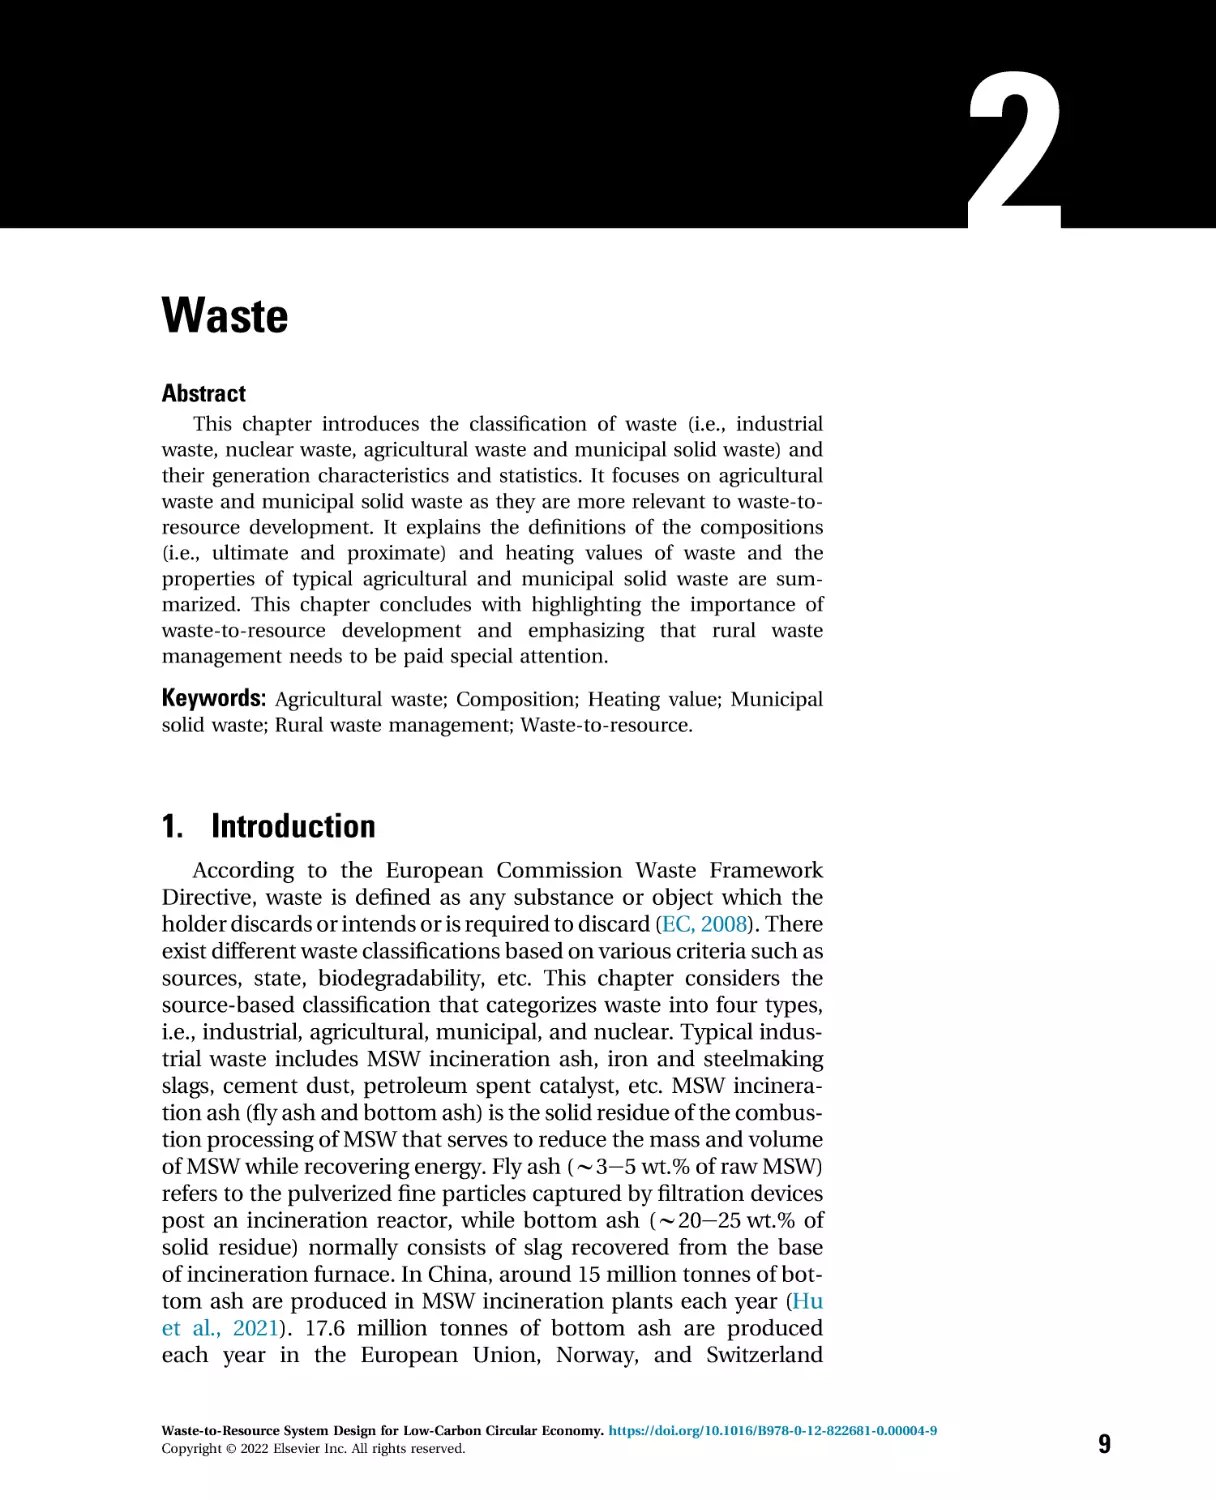 2 - Waste
1. Introduction